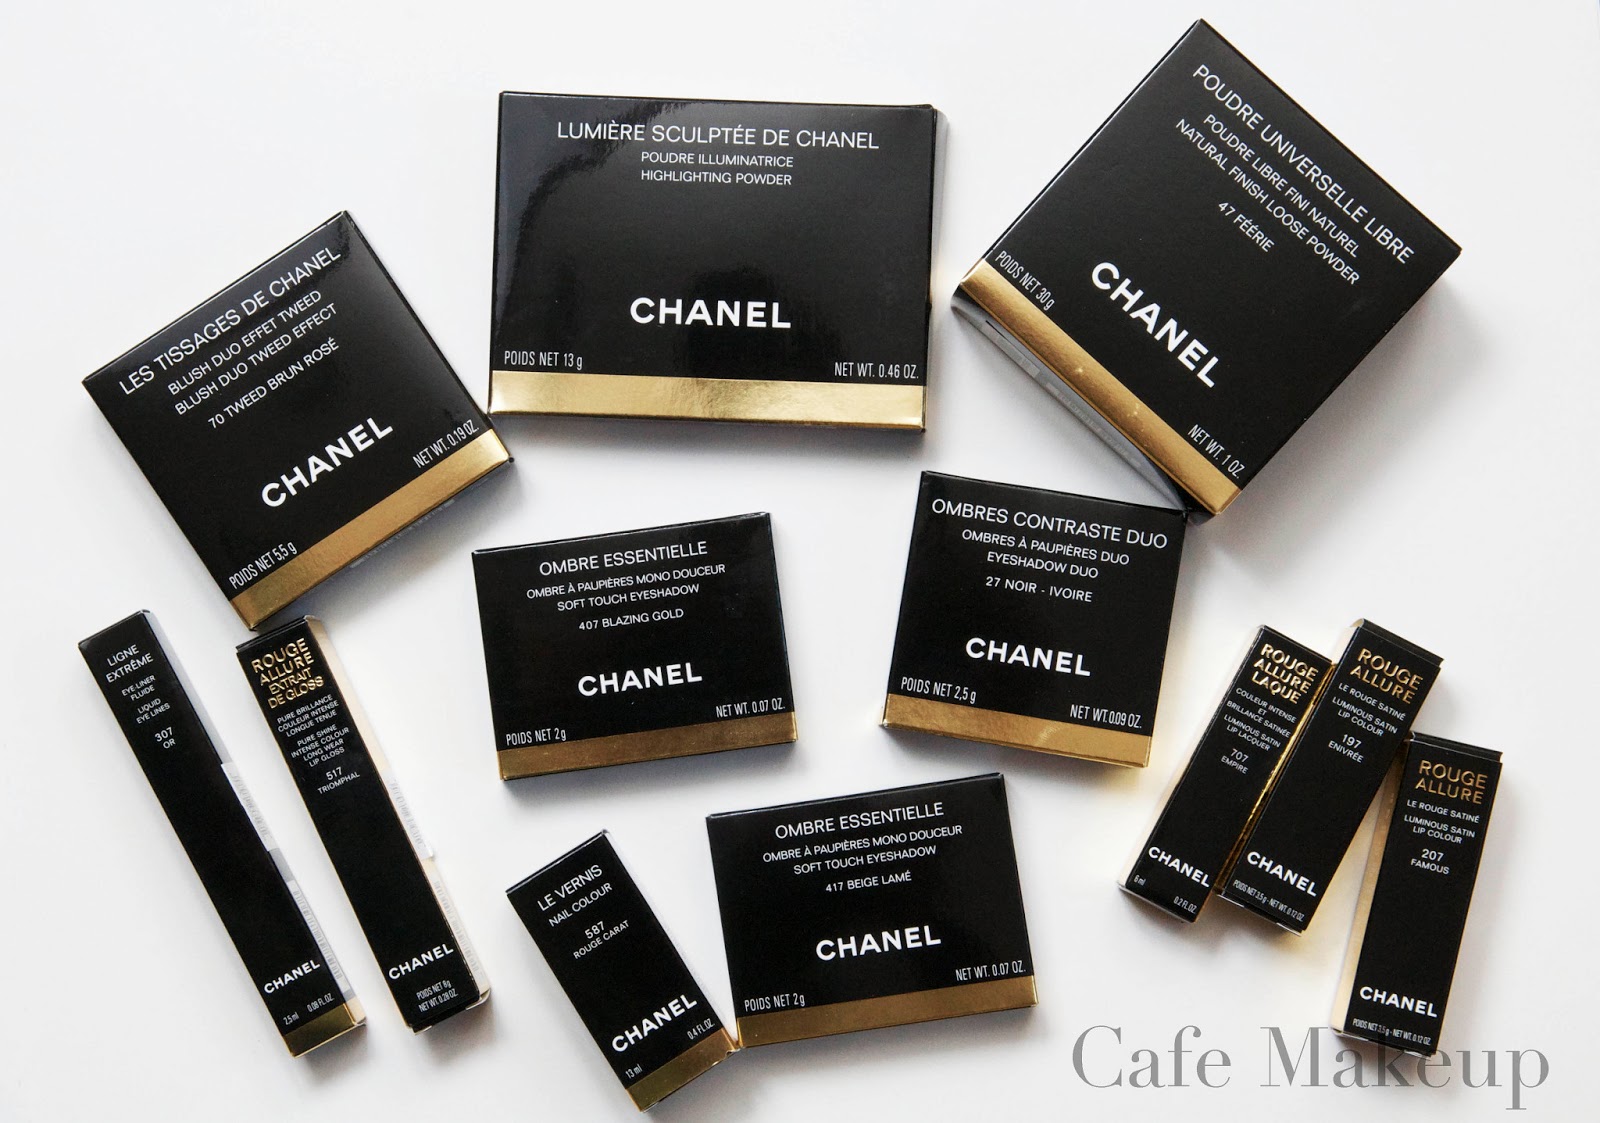 Case Study of Chanel's Brand Management